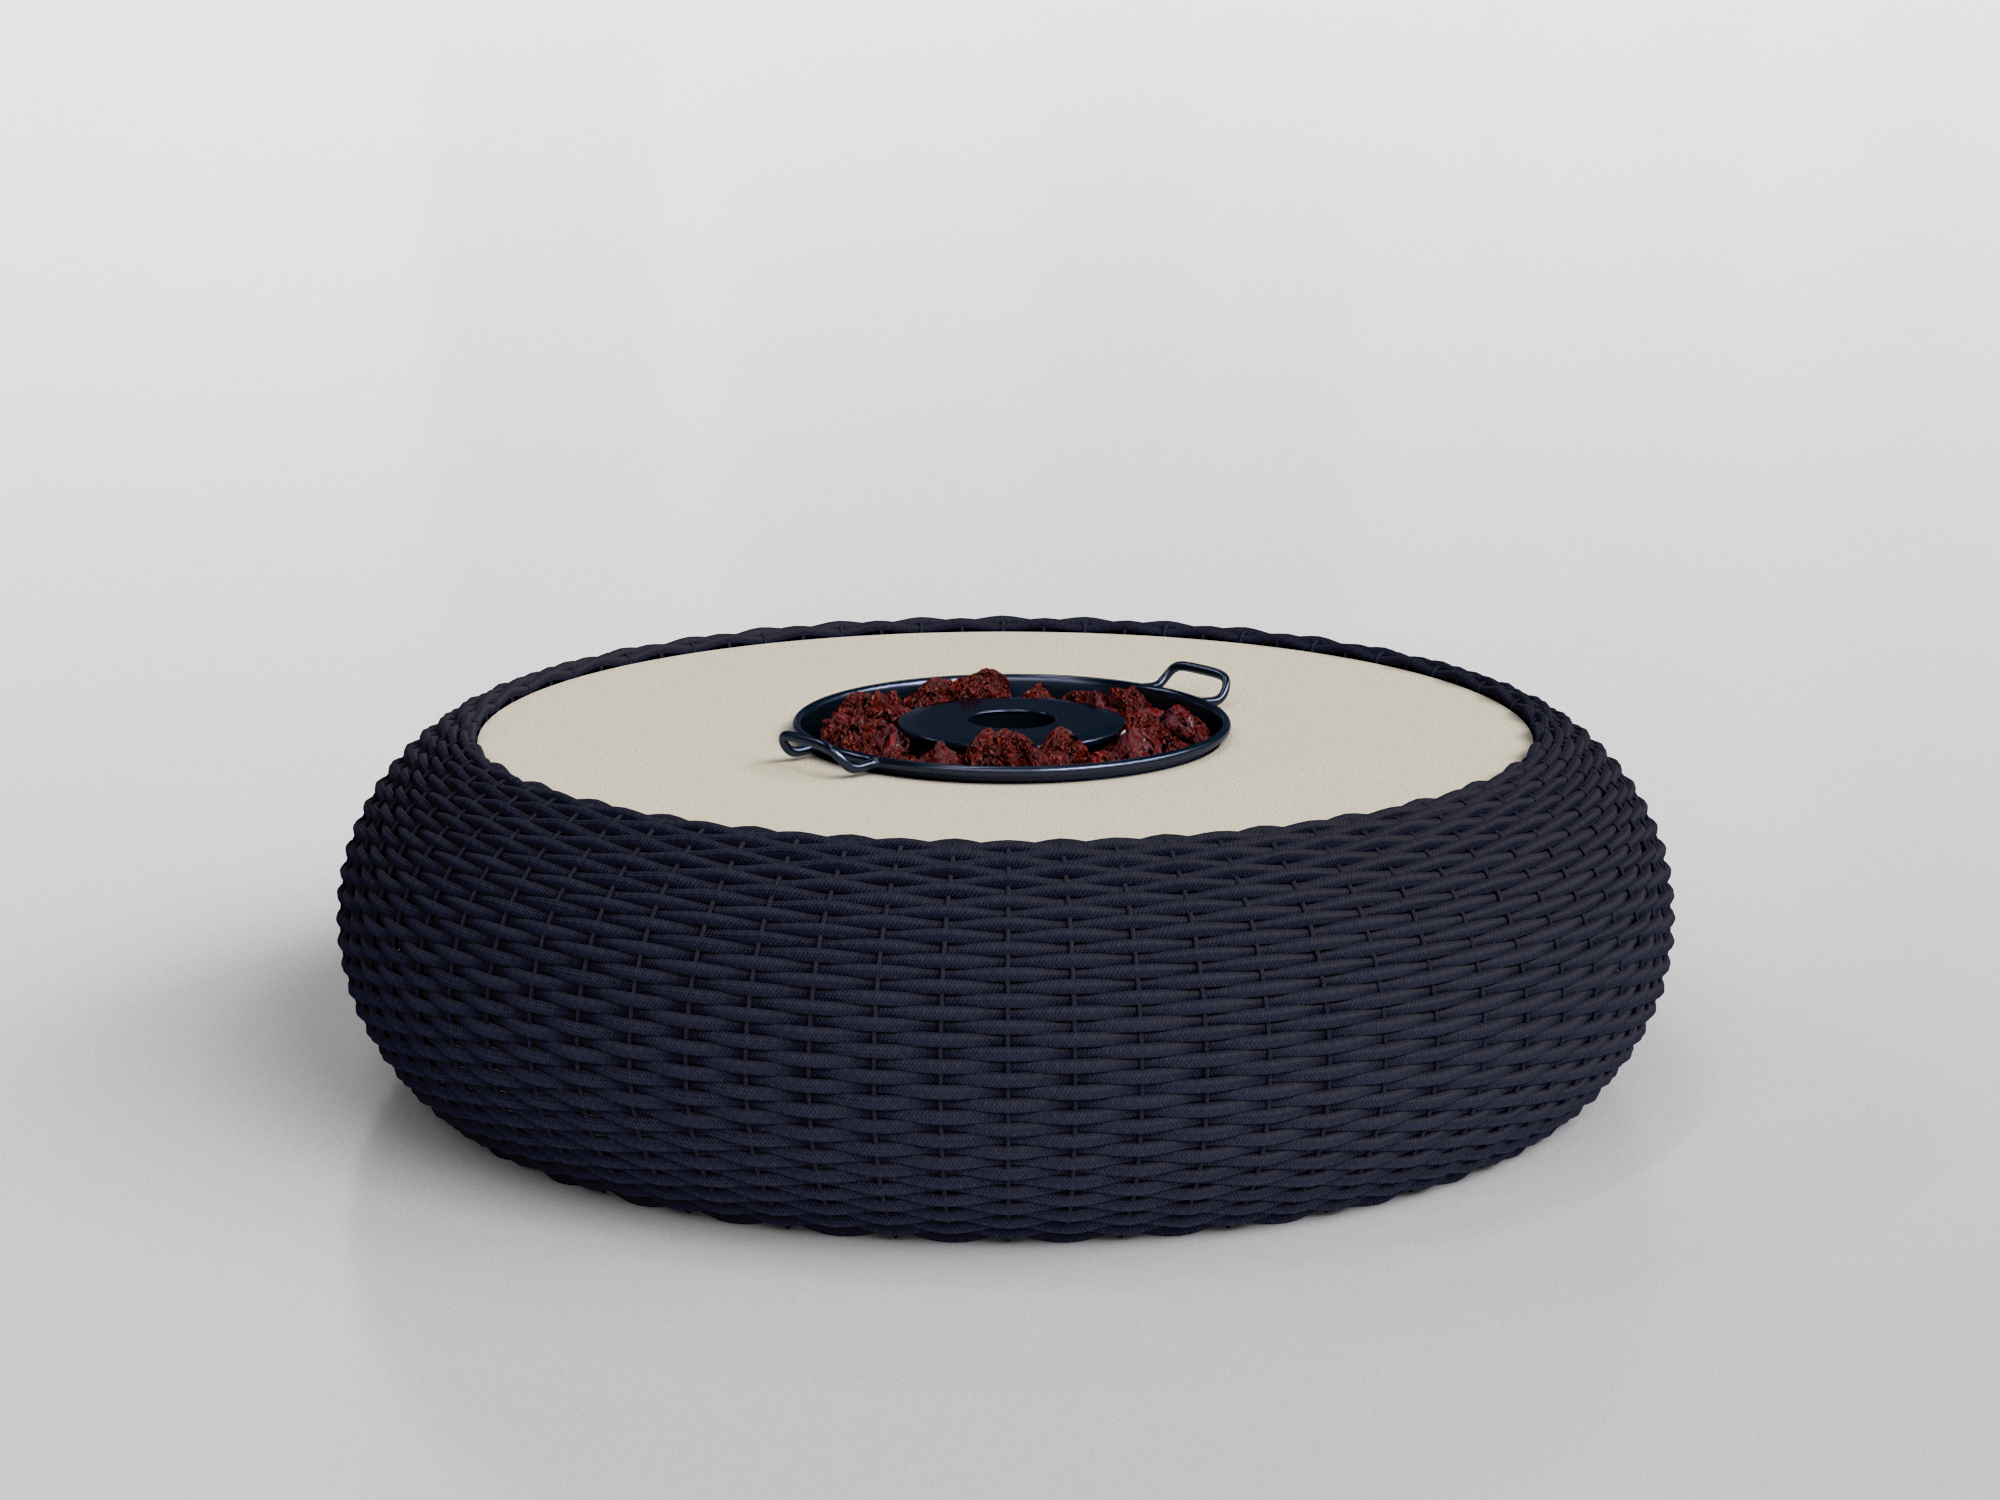 Marina Coffee Table With Bucket with aluminum estruture and nautical rope finishing, designed by Luciano Mandelli